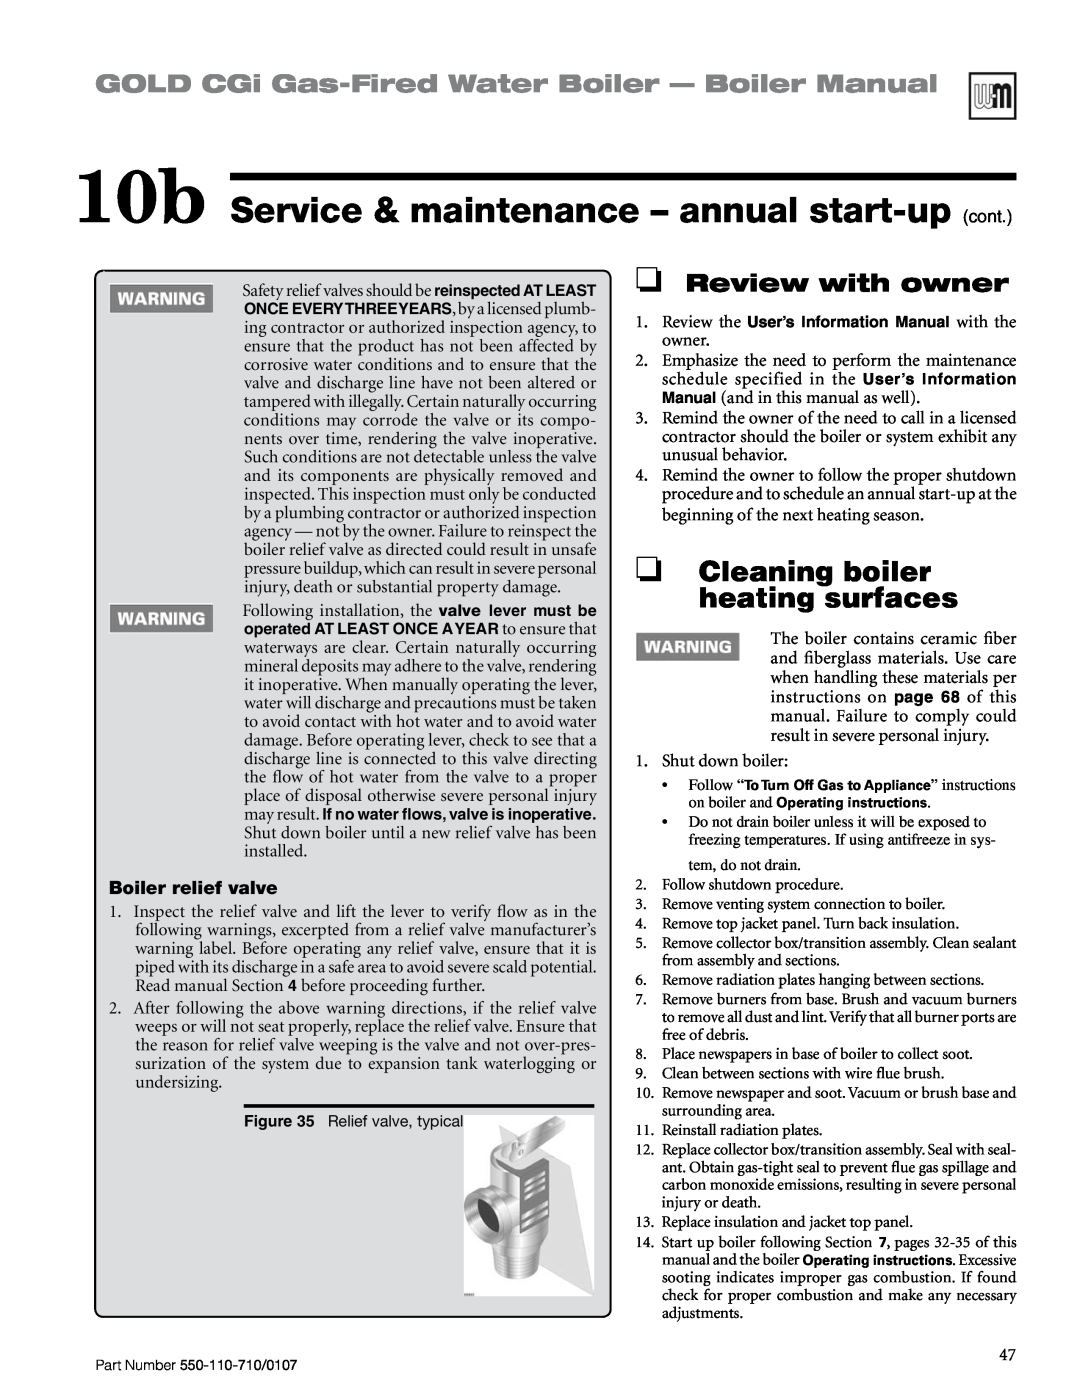 Weil-McLain Series 2 Cleaning boiler heating surfaces, 10b Service & maintenance – annual start-up cont, Review with owner 